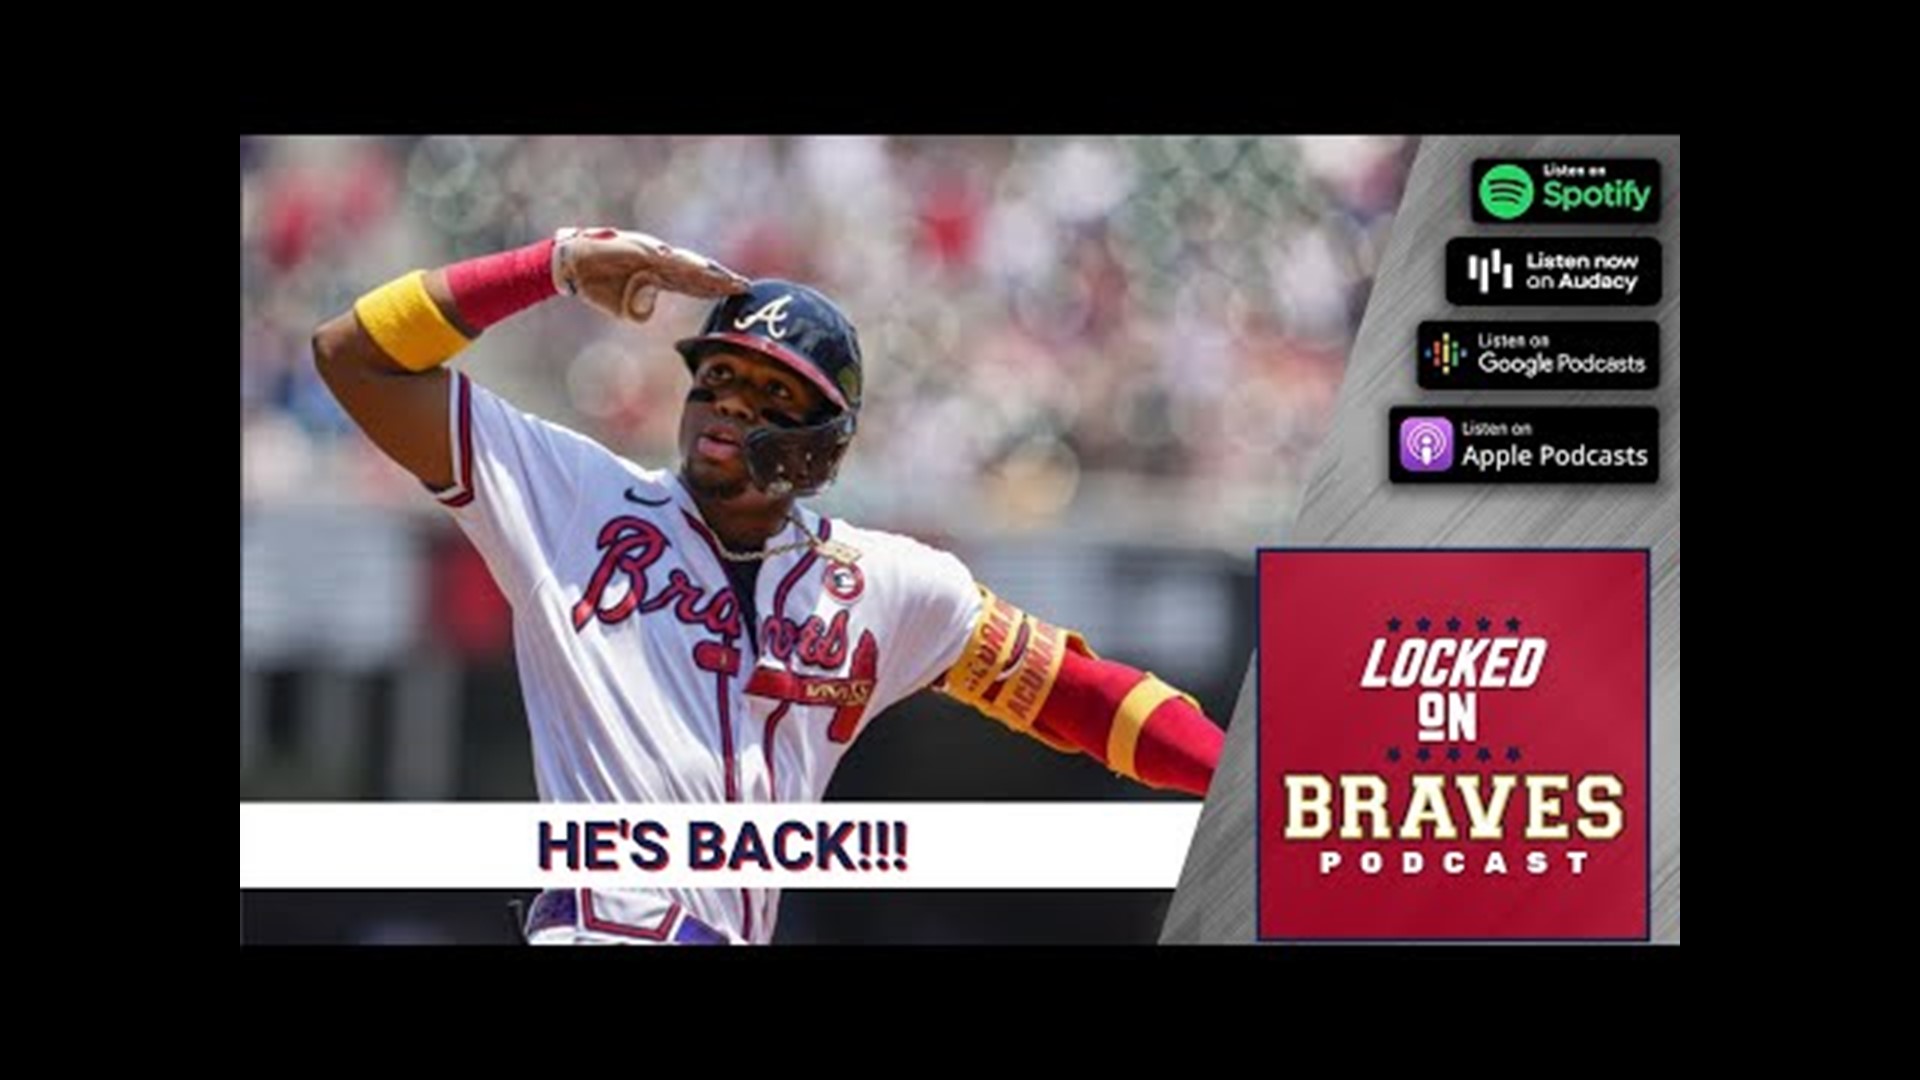 Ronald Acuna Jr. is BACK! Atlanta Braves Get a Boost After Heartbreaking Loss in Extra Innings